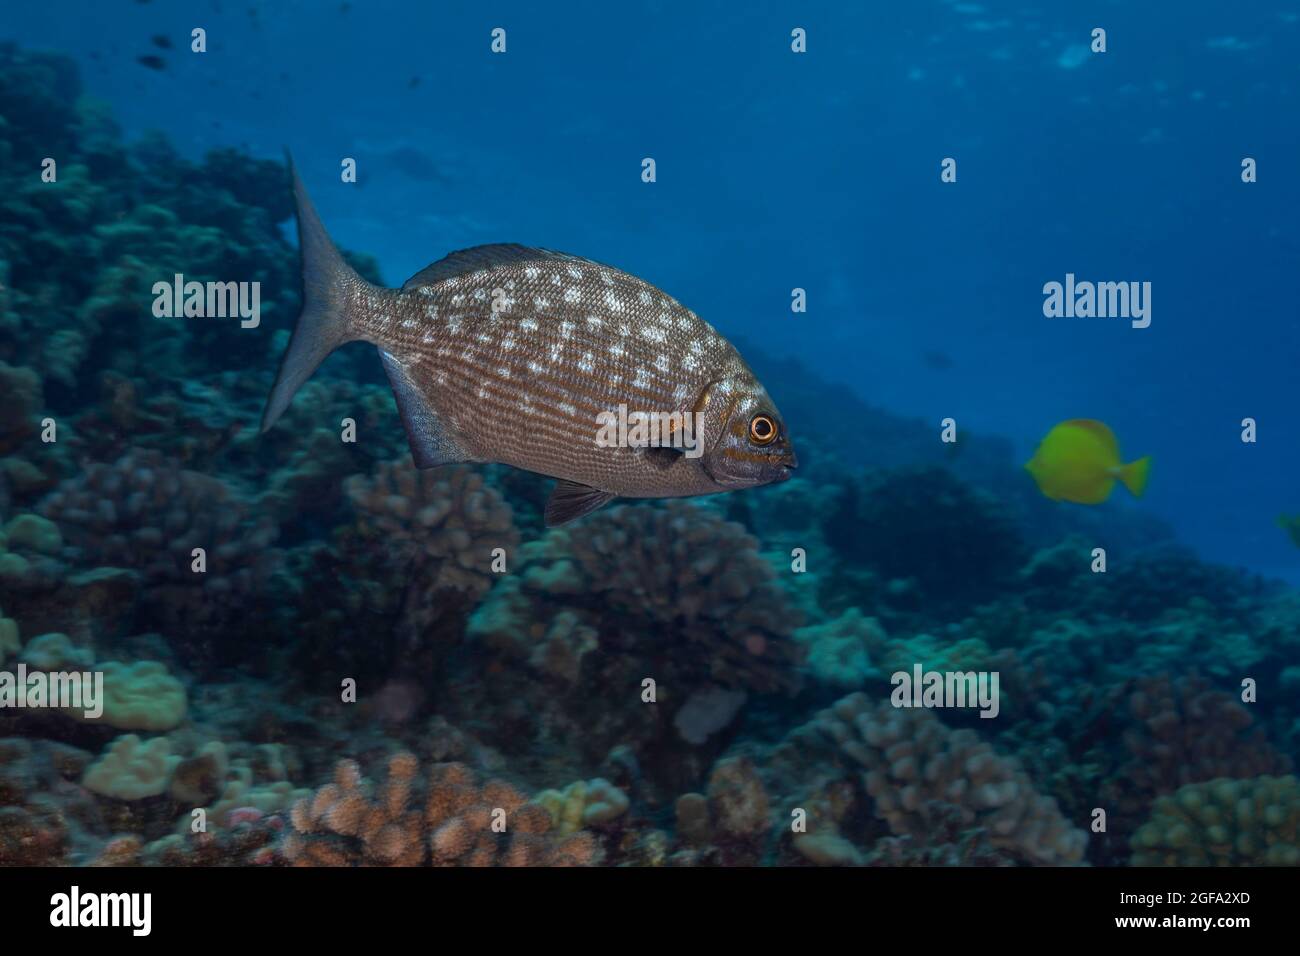 This spotted color pattern for the brassy chub, Kyphosus vaigiensis, is often visible when they are feeding, Hawaii. Stock Photo